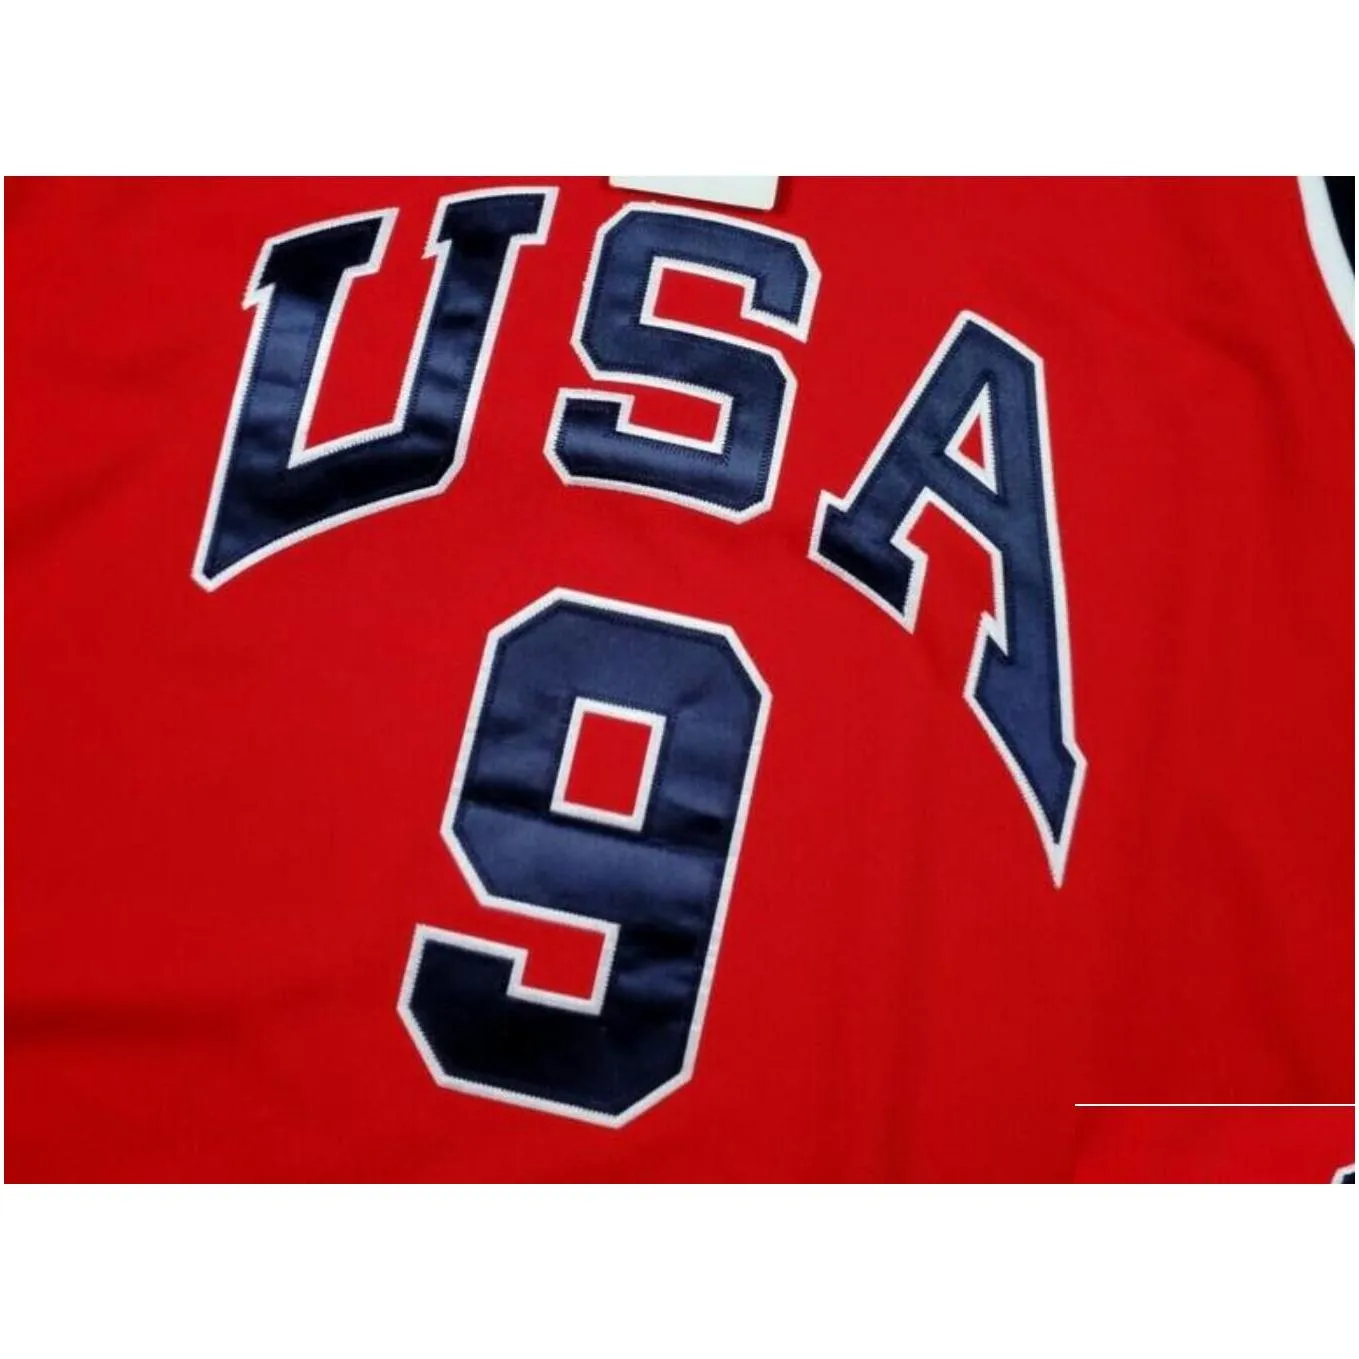 rare Basketball Jersey Men Youth women Vintage retro 9 Michael 1984 USA High School Size S-5XL custom any name or number